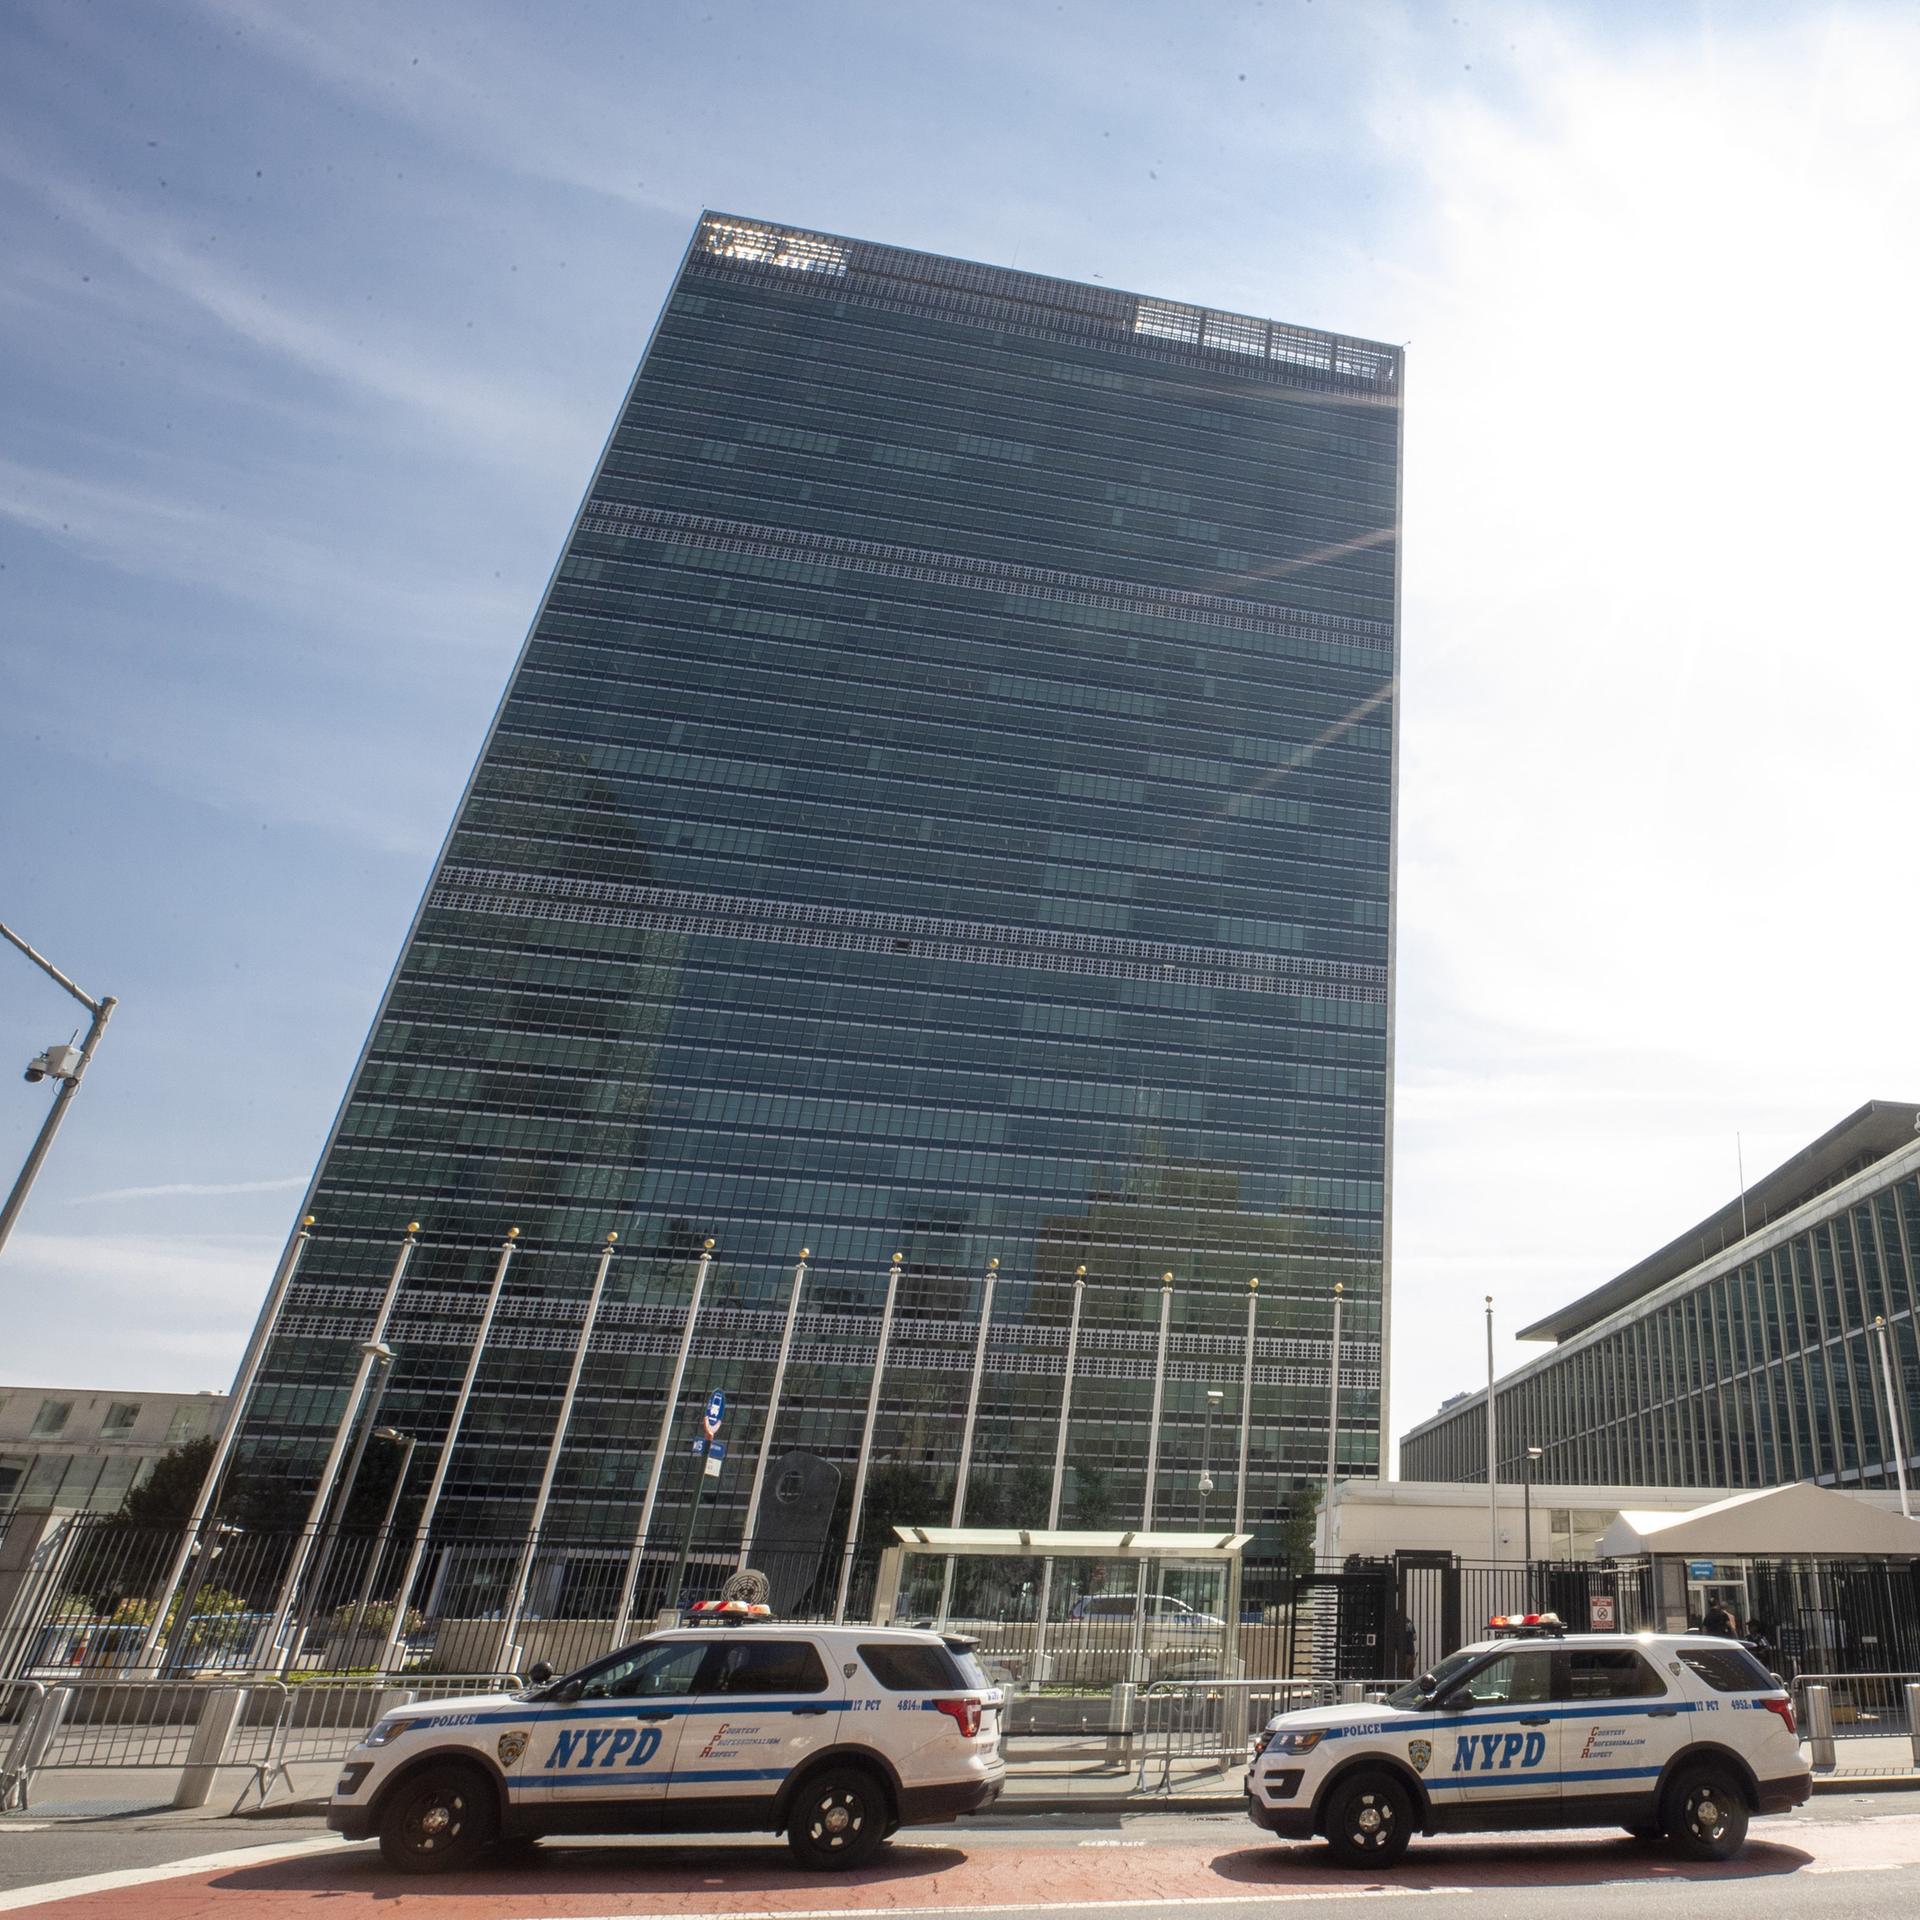 NEW YORK, USA - SEPTEMBER 17: Security measures are taken ahead of the 77th session of the United Nations General Assembly, on September 17, 2022 in New York, United States. Aytac Unal / Anadolu Agency